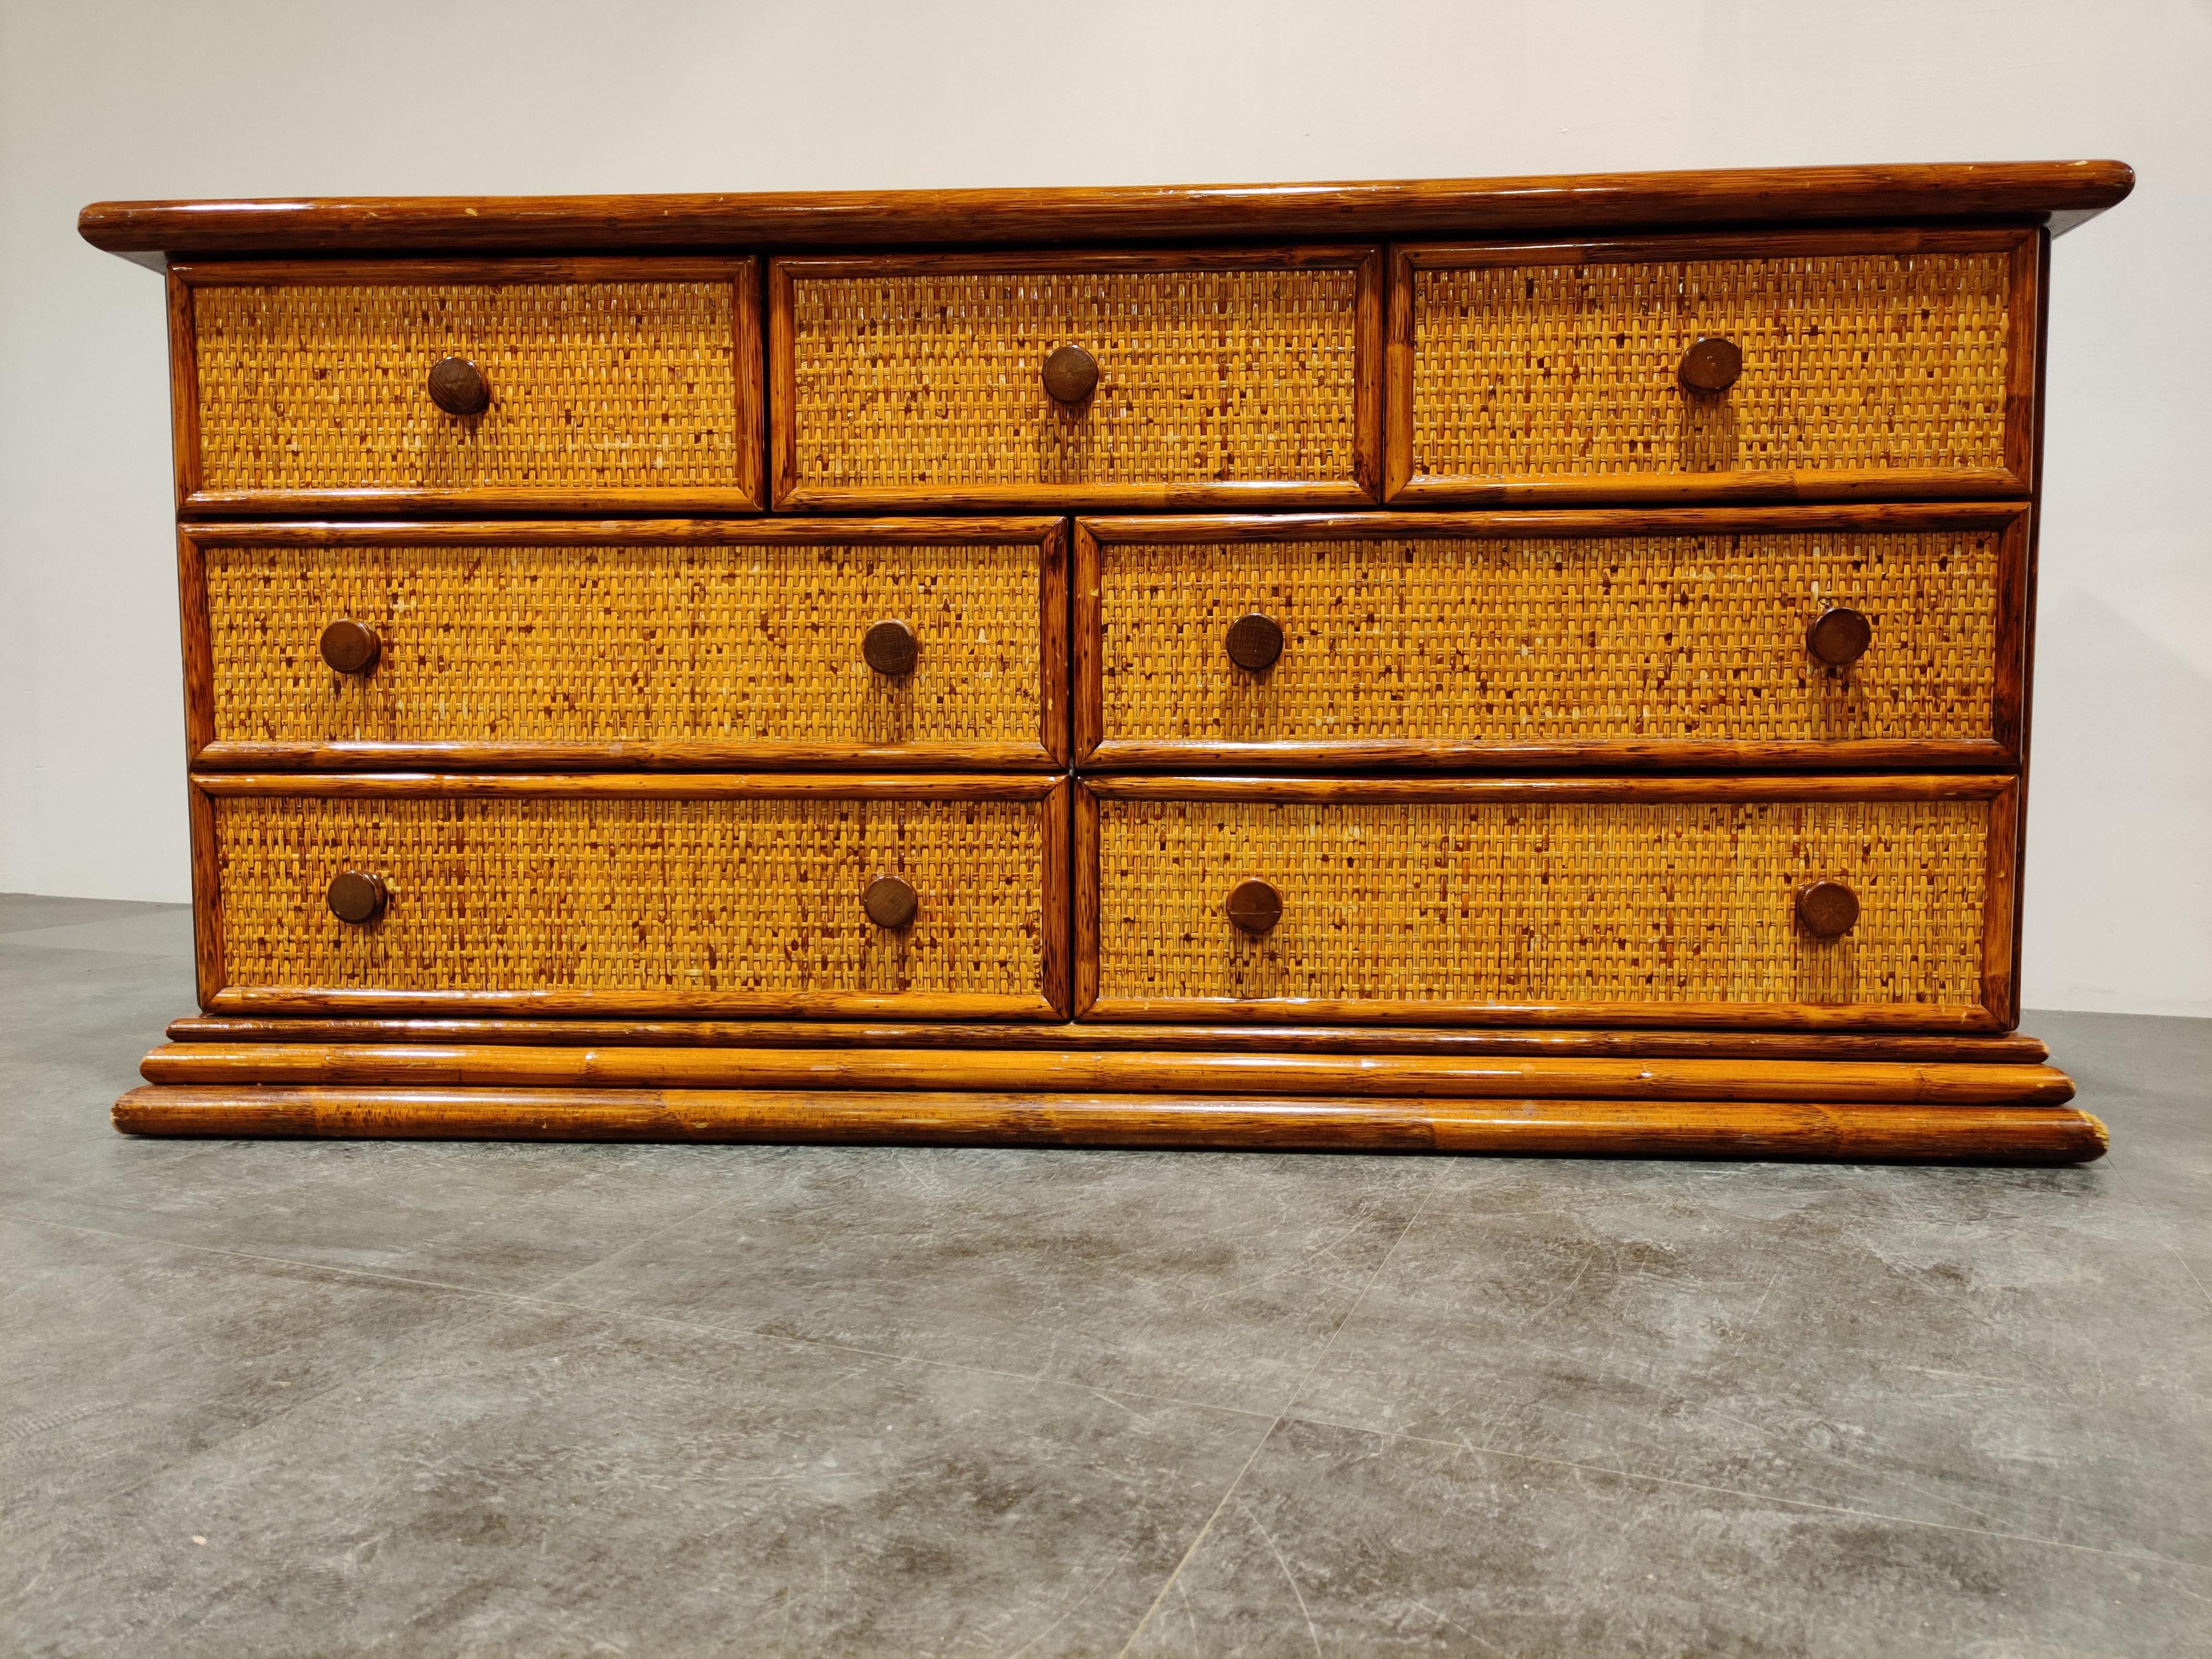 Elegant wooden and rattan chest of drawers with 7 drawers.

Produced by Maugrion, delivering quality rattan furniture and sold in high segment furniture shops such as Roche Bobois.

Beautiful color and lovely handles.

Good condition, slight